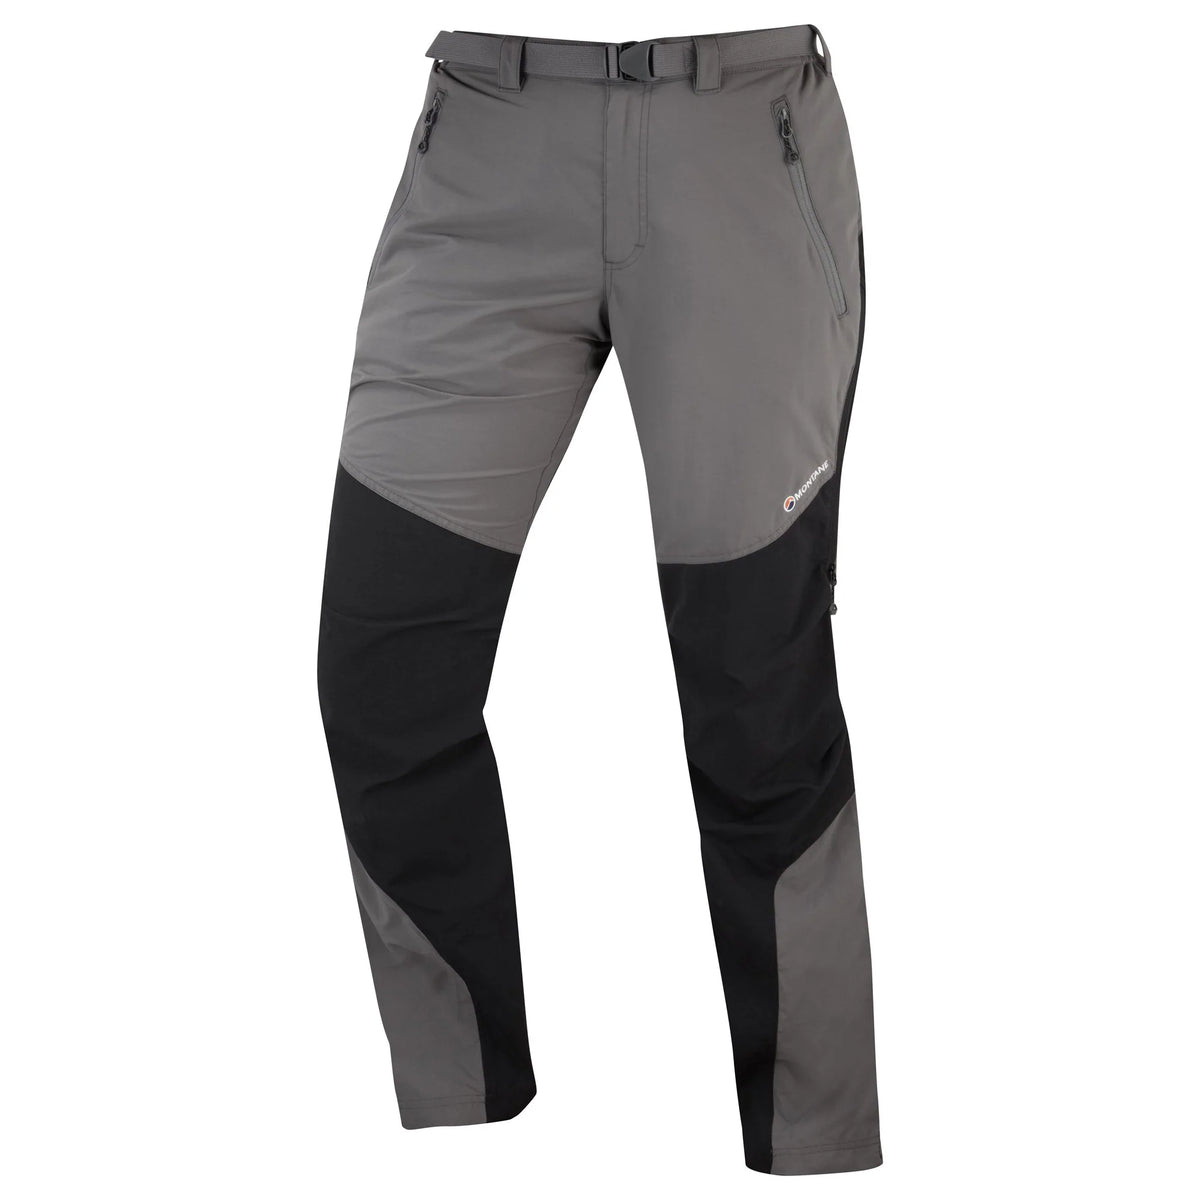 Terra Pants Reg Leg OLD - 毅成戶外用品RC Outfitters